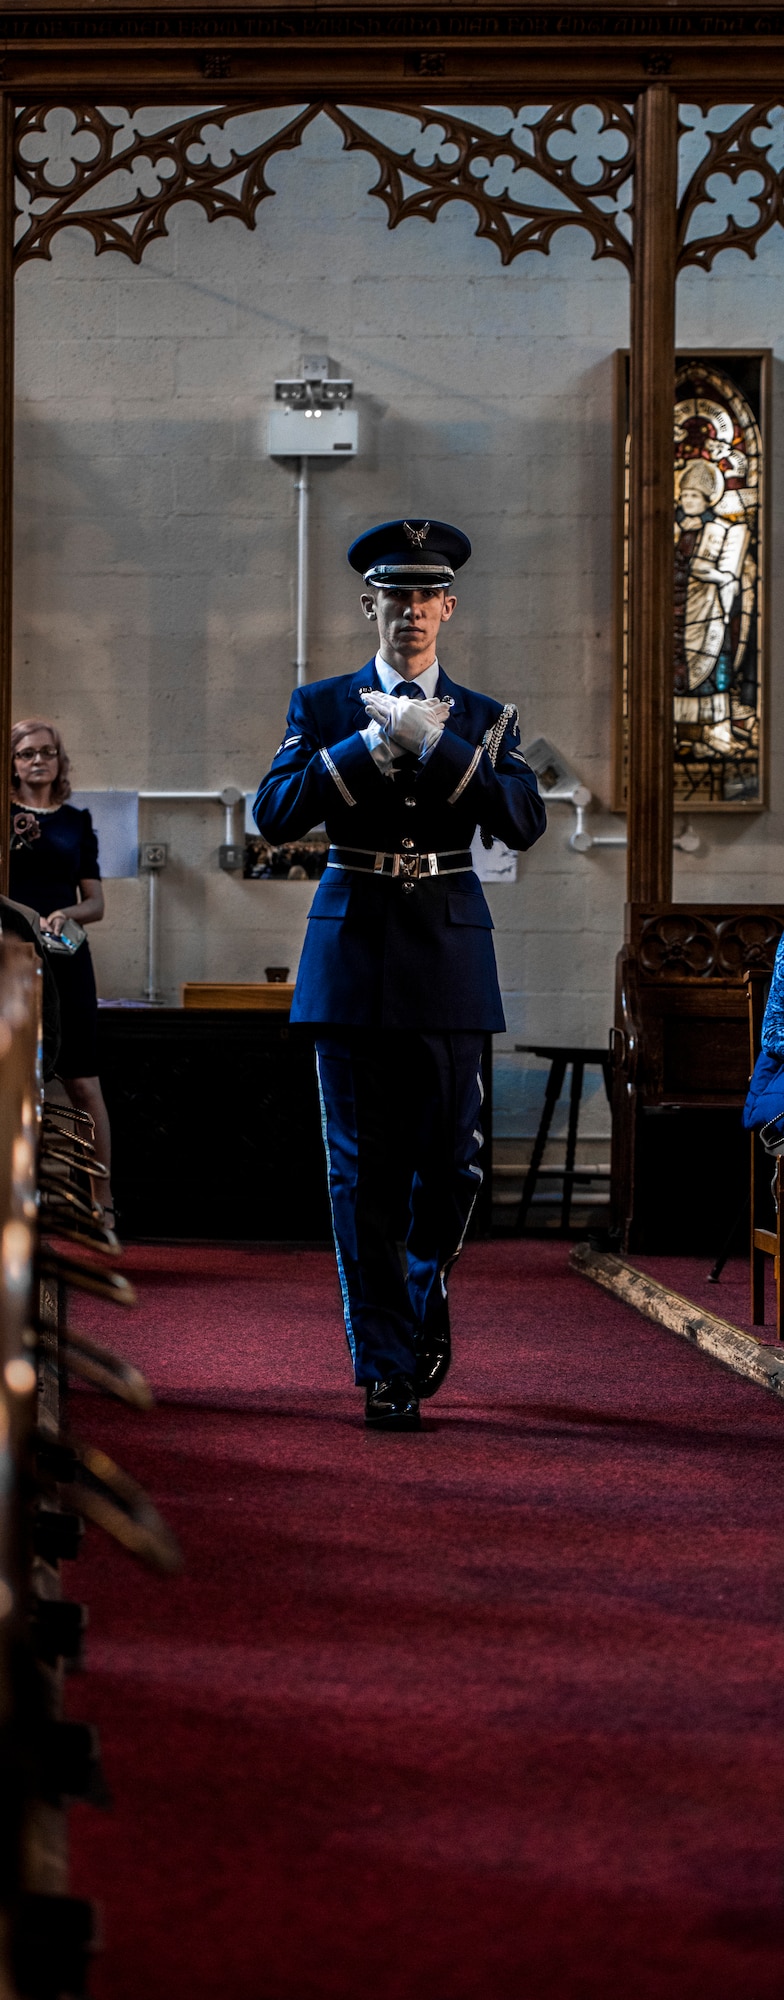 U.S. Air Force Airman First Class Joshua Holsing cradles the American flag while marching down the aisle of St. Augustine’s church in Sheffield, United Kingdom, February 24th. This year’s annual memorial service was accompanied by a United States Air Force and Royal Air Force flypast in Endcliffe Park two days prior, where thousands of U.K. residents honored the memory of ten fallen U.S. Airmen who died when their war-crippled B-17 Flying Fortress crash landed to avoid killing residents and nearby children. (U.S. Air Force photo by Tech Sgt. Aaron Thomasson)